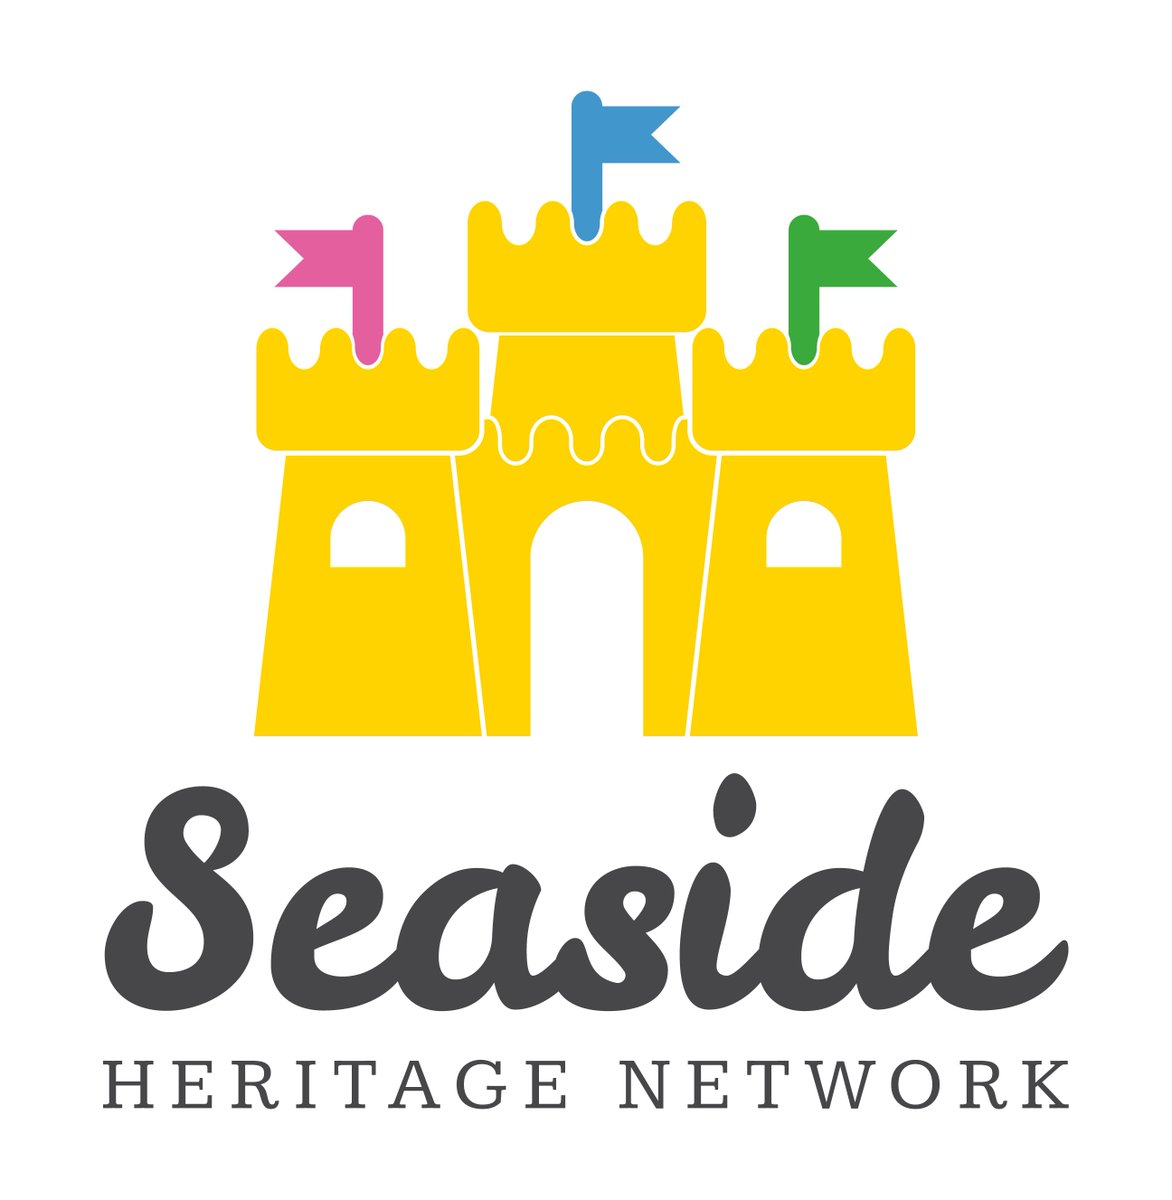 You can also follow the Seaside Heritage Network @seaside_network to connect with people and organisations interested in houses, buildings and history at the #GreatBritishSeaside #HouseHistoryHour